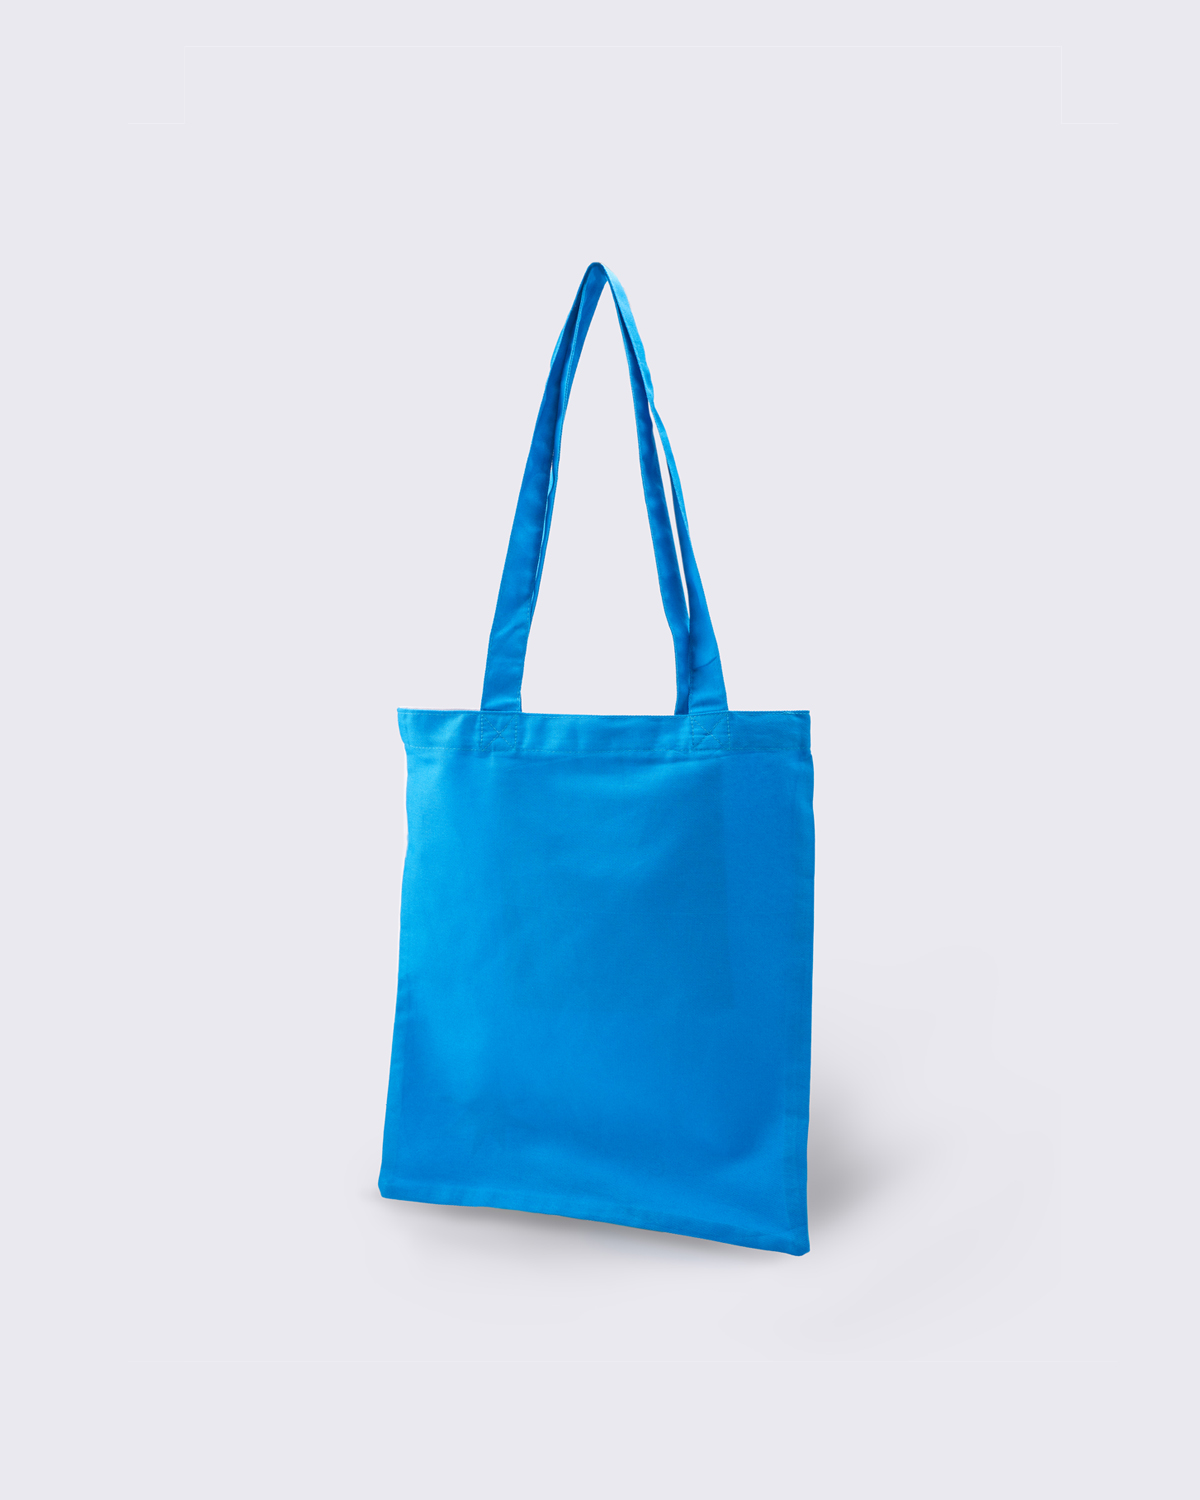 M+ x THE WEIRD THINGS Tote Bag